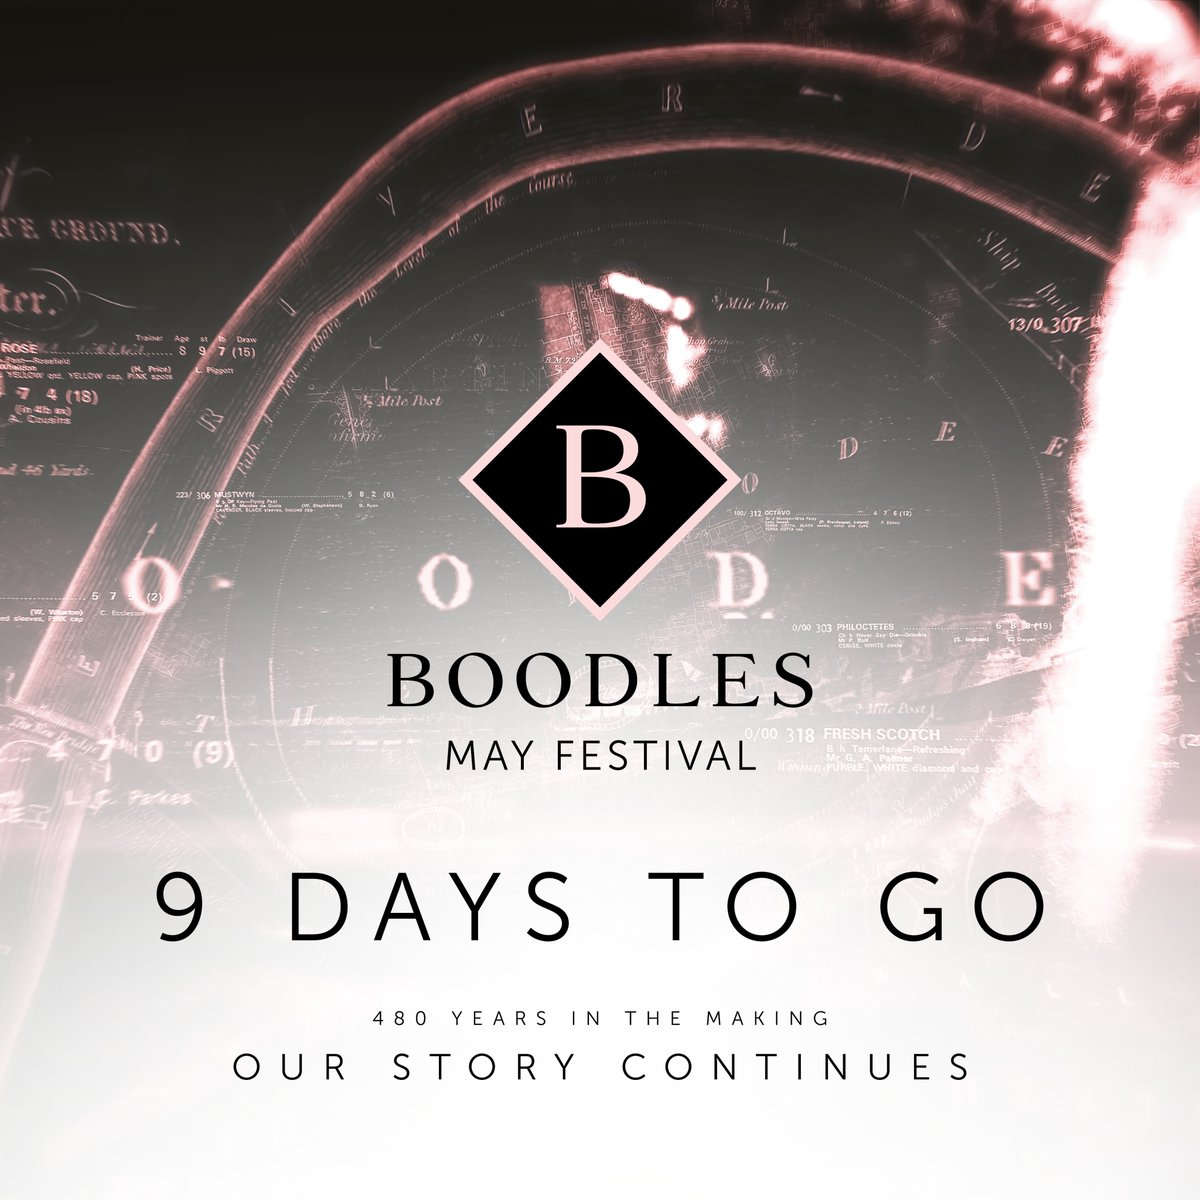 9 days to go! #BoodlesMayFest #OurStoryContinues #ChesterRaces